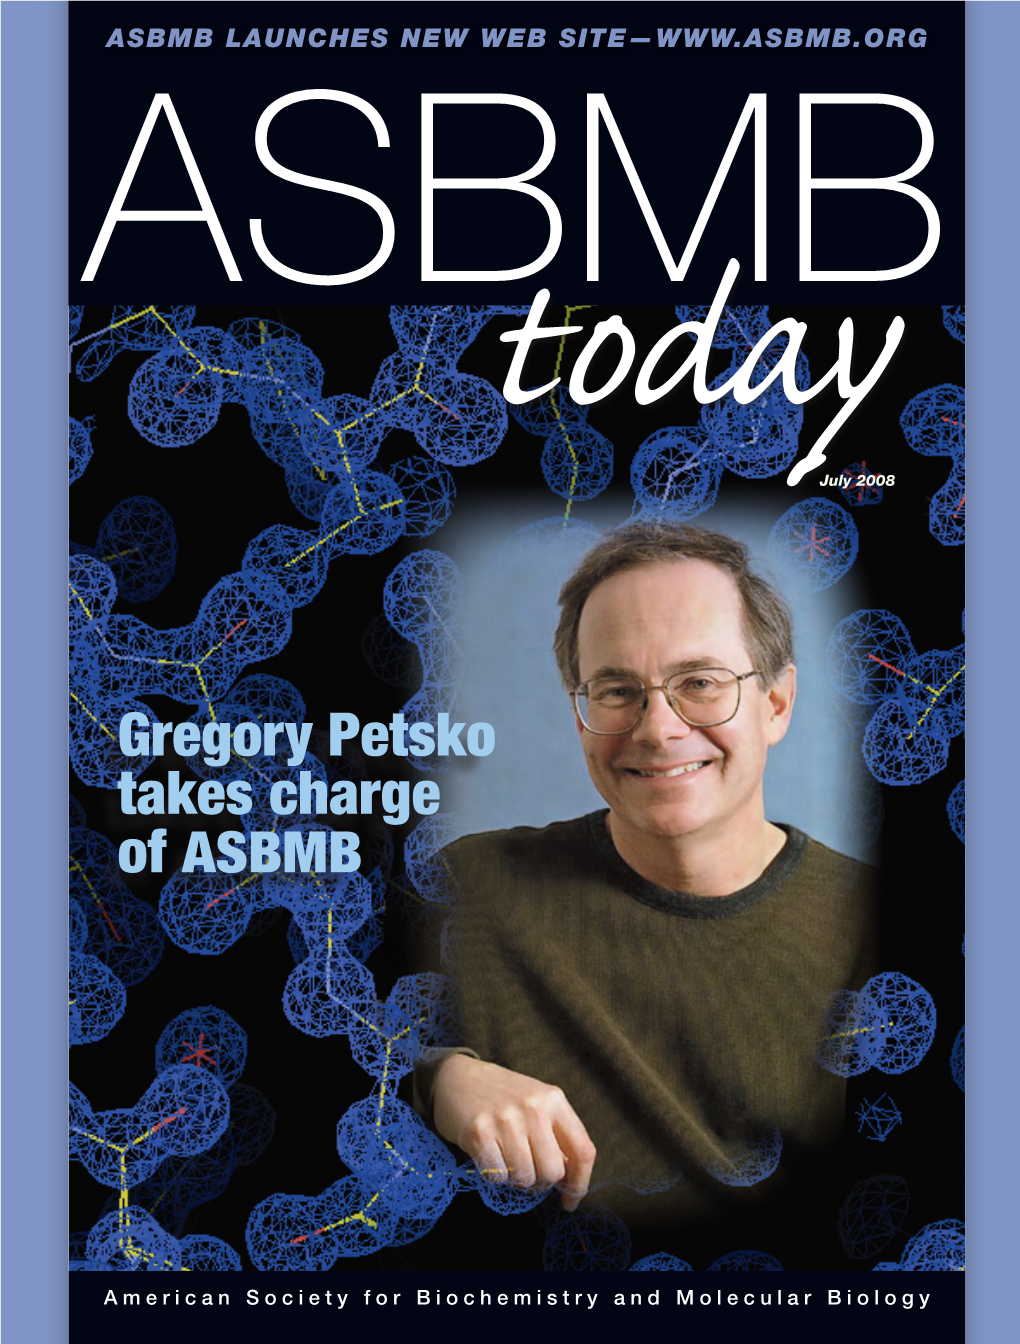 Gregory Petsko Takes Charge of ASBMB